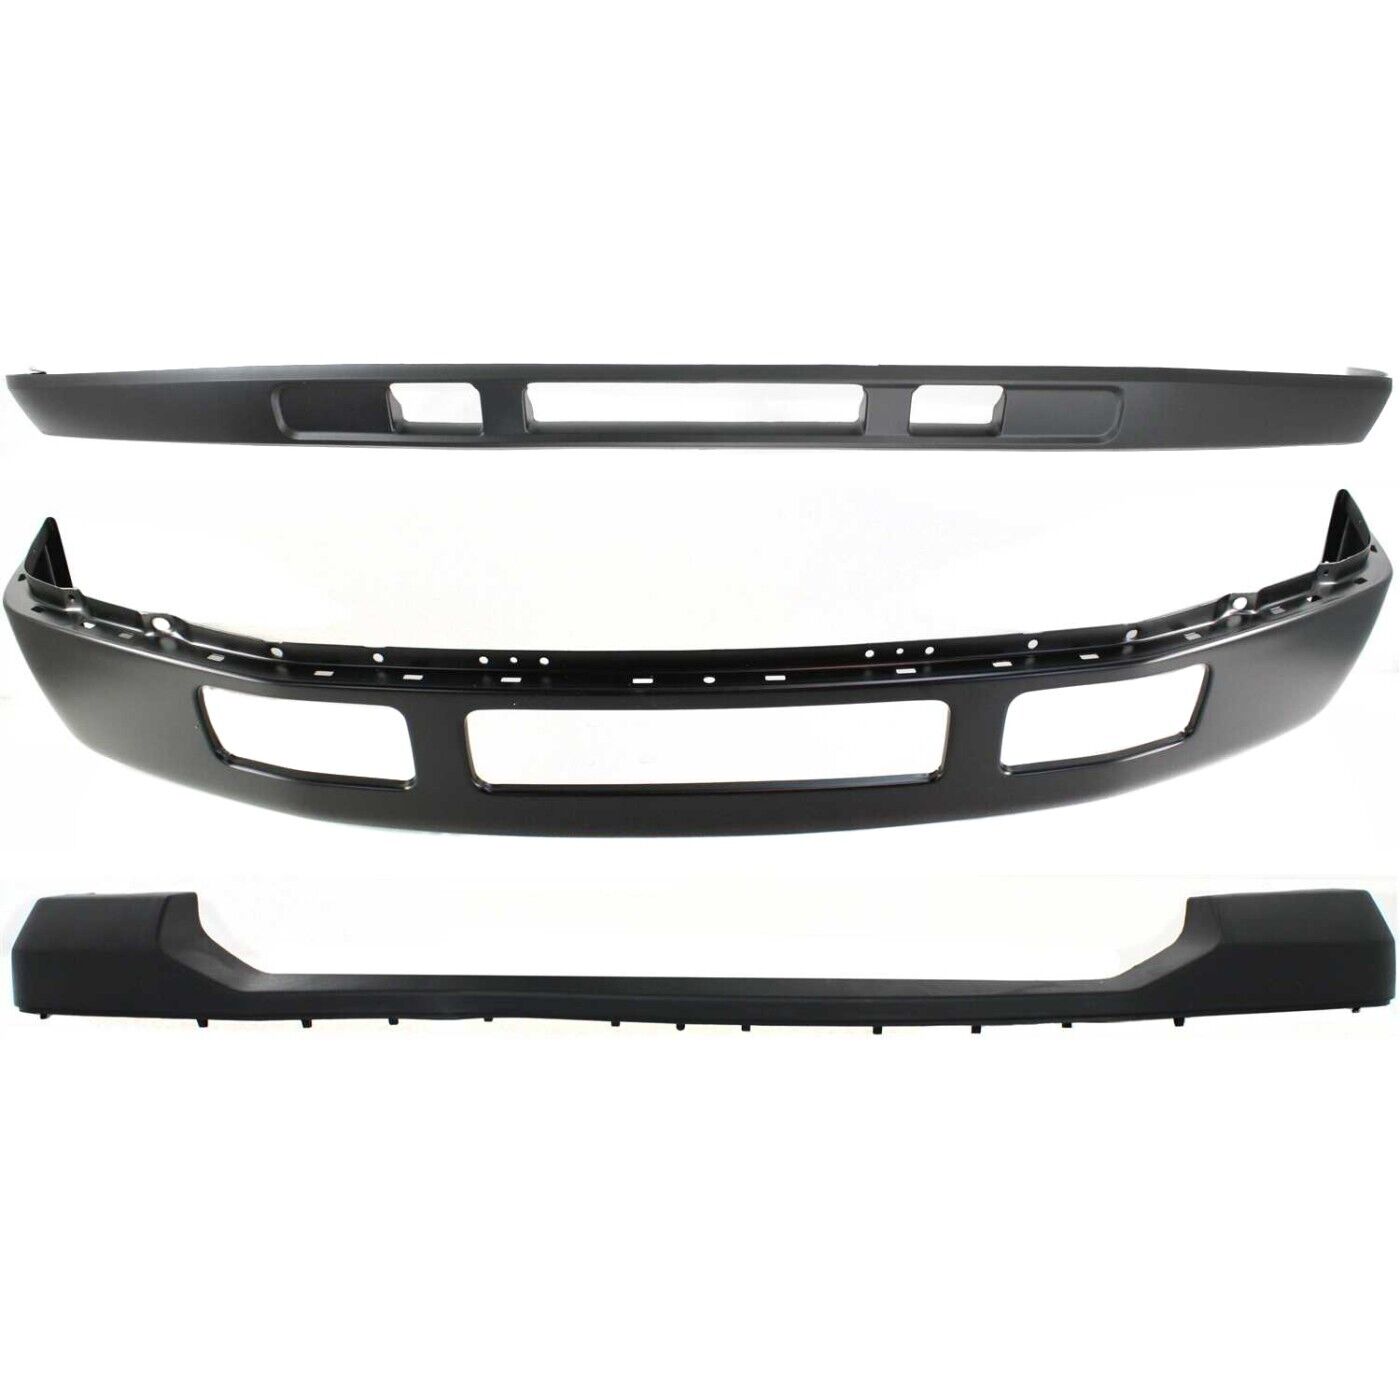 Front Bumper Kit For 2006-2007 Ford F-250 Super Duty Textured